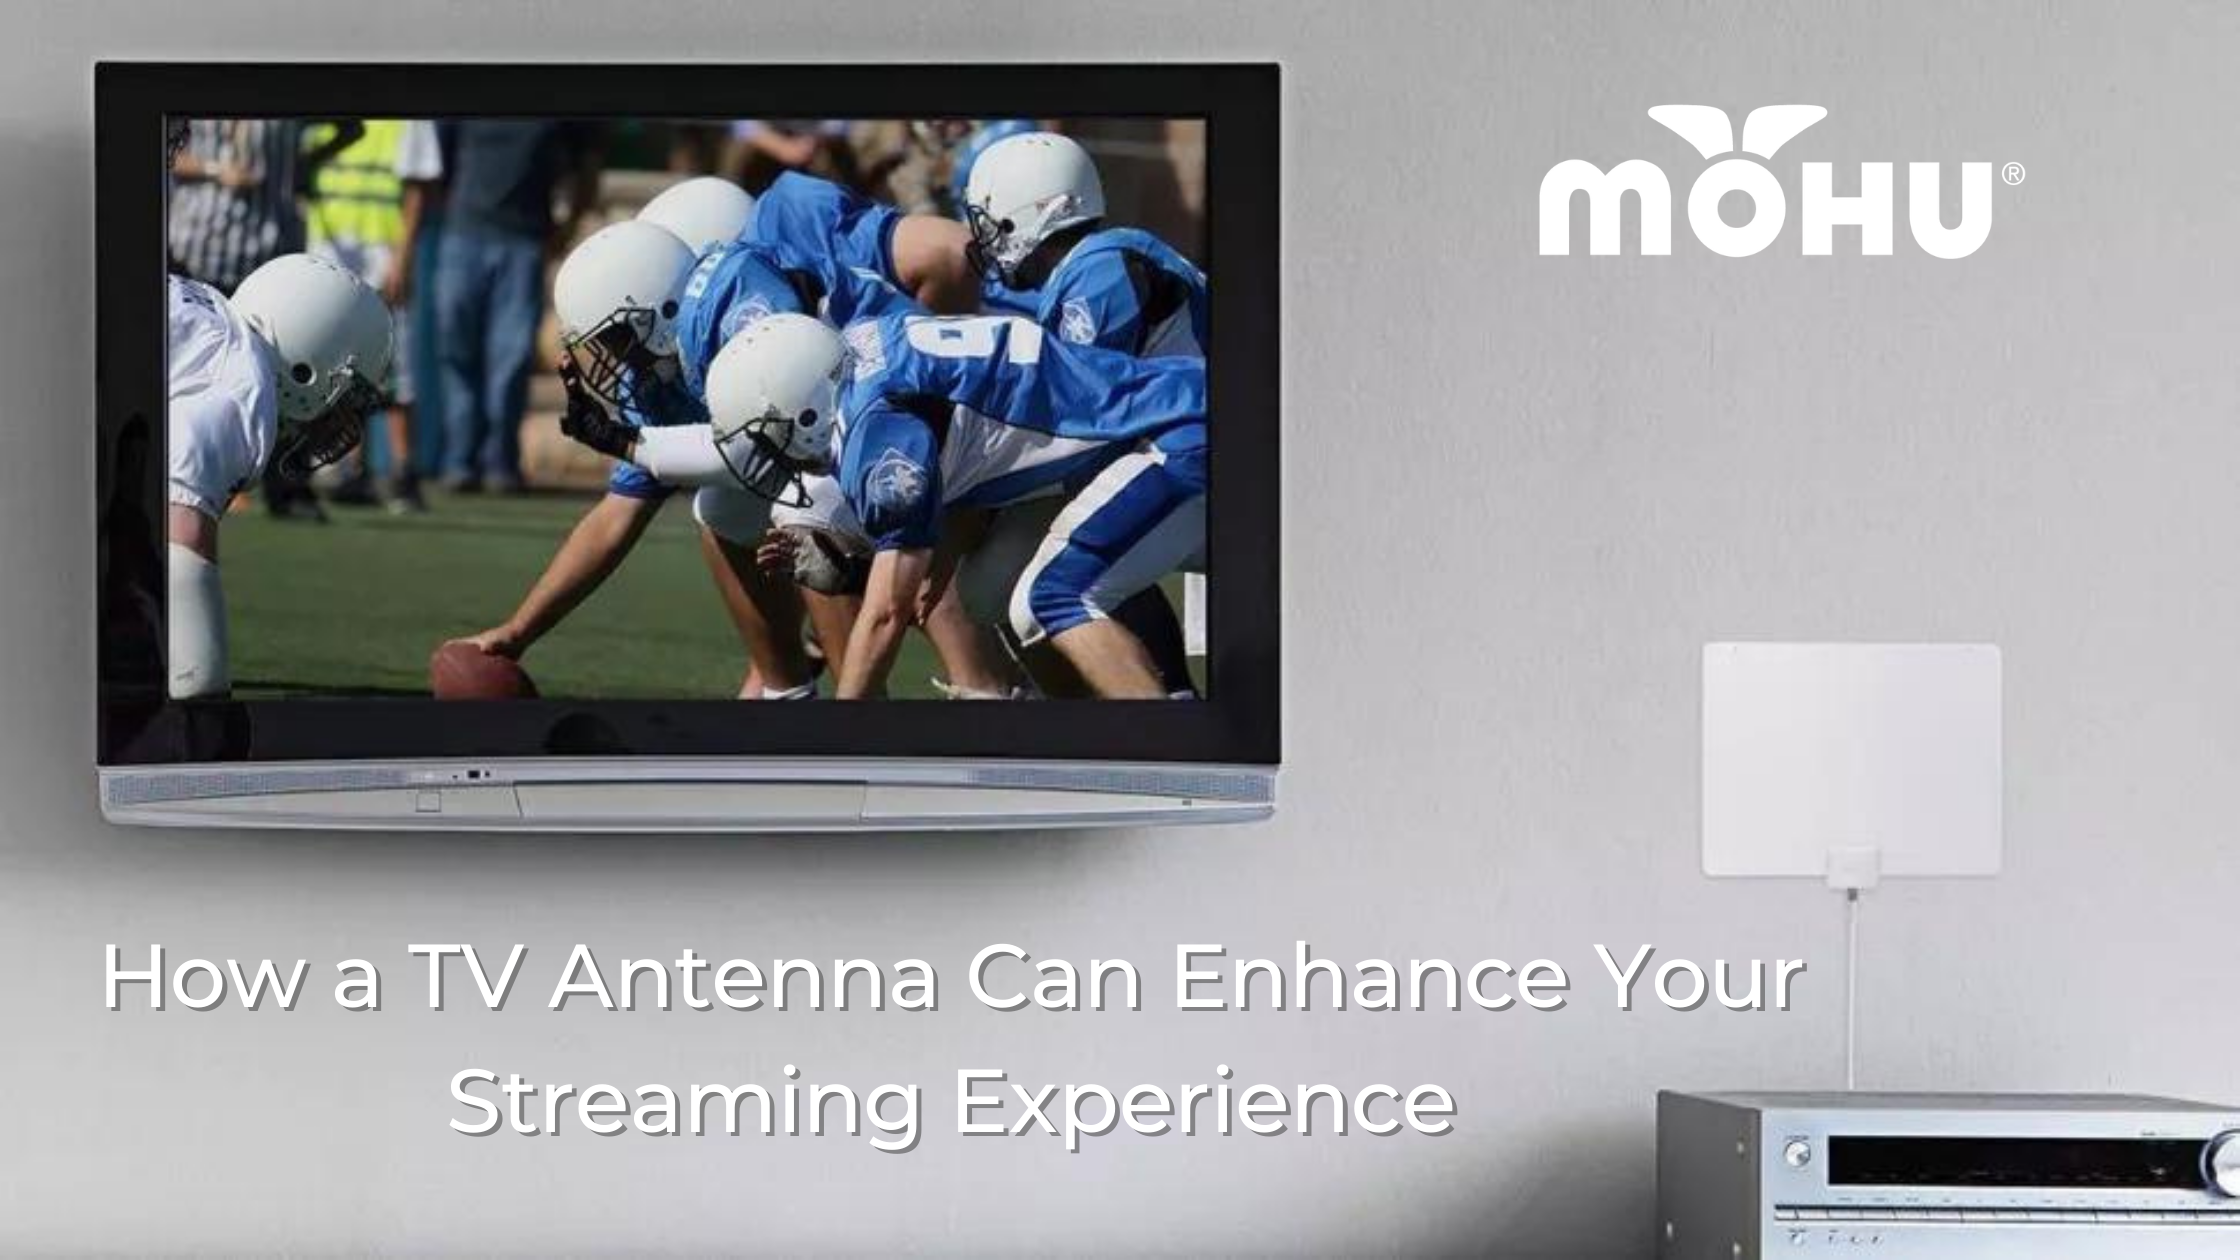 How a Mohu TV Antenna Can Enhance Your Streaming Experience, Mohu antenna on wall with flat screen TV with football playing